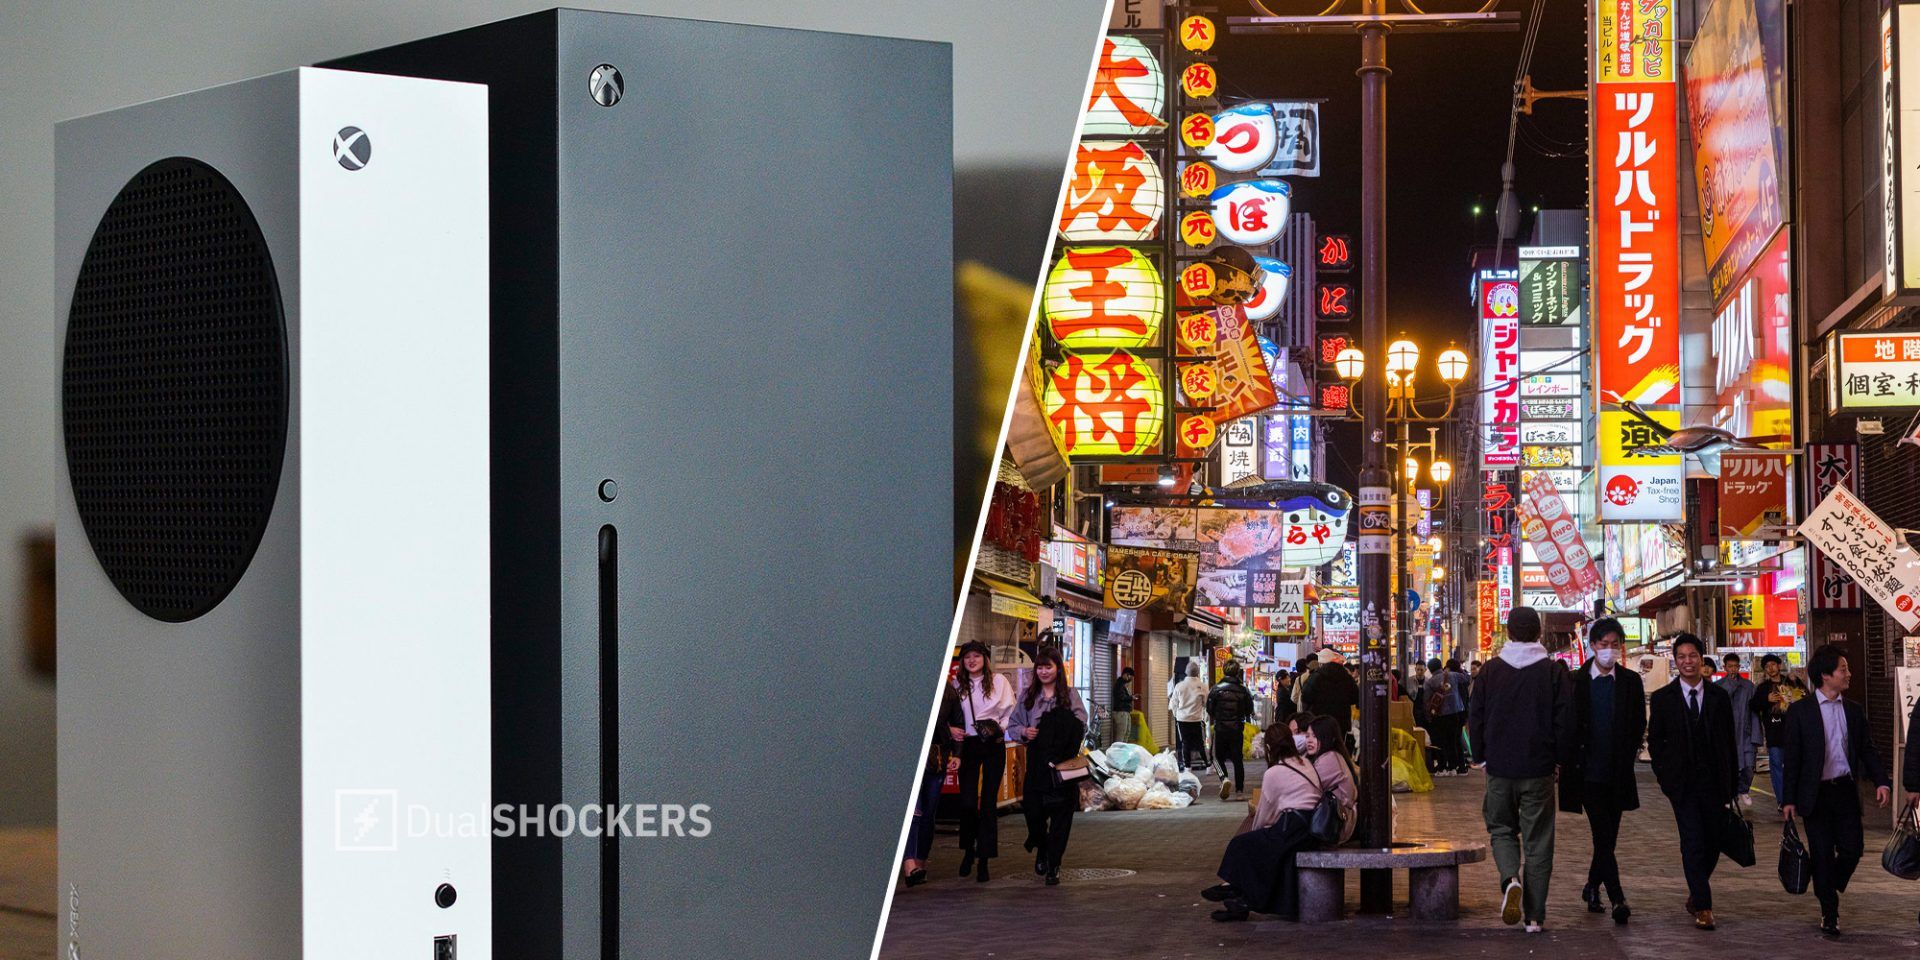 Xbox Series X and Series S on left, busy street in Japan on right